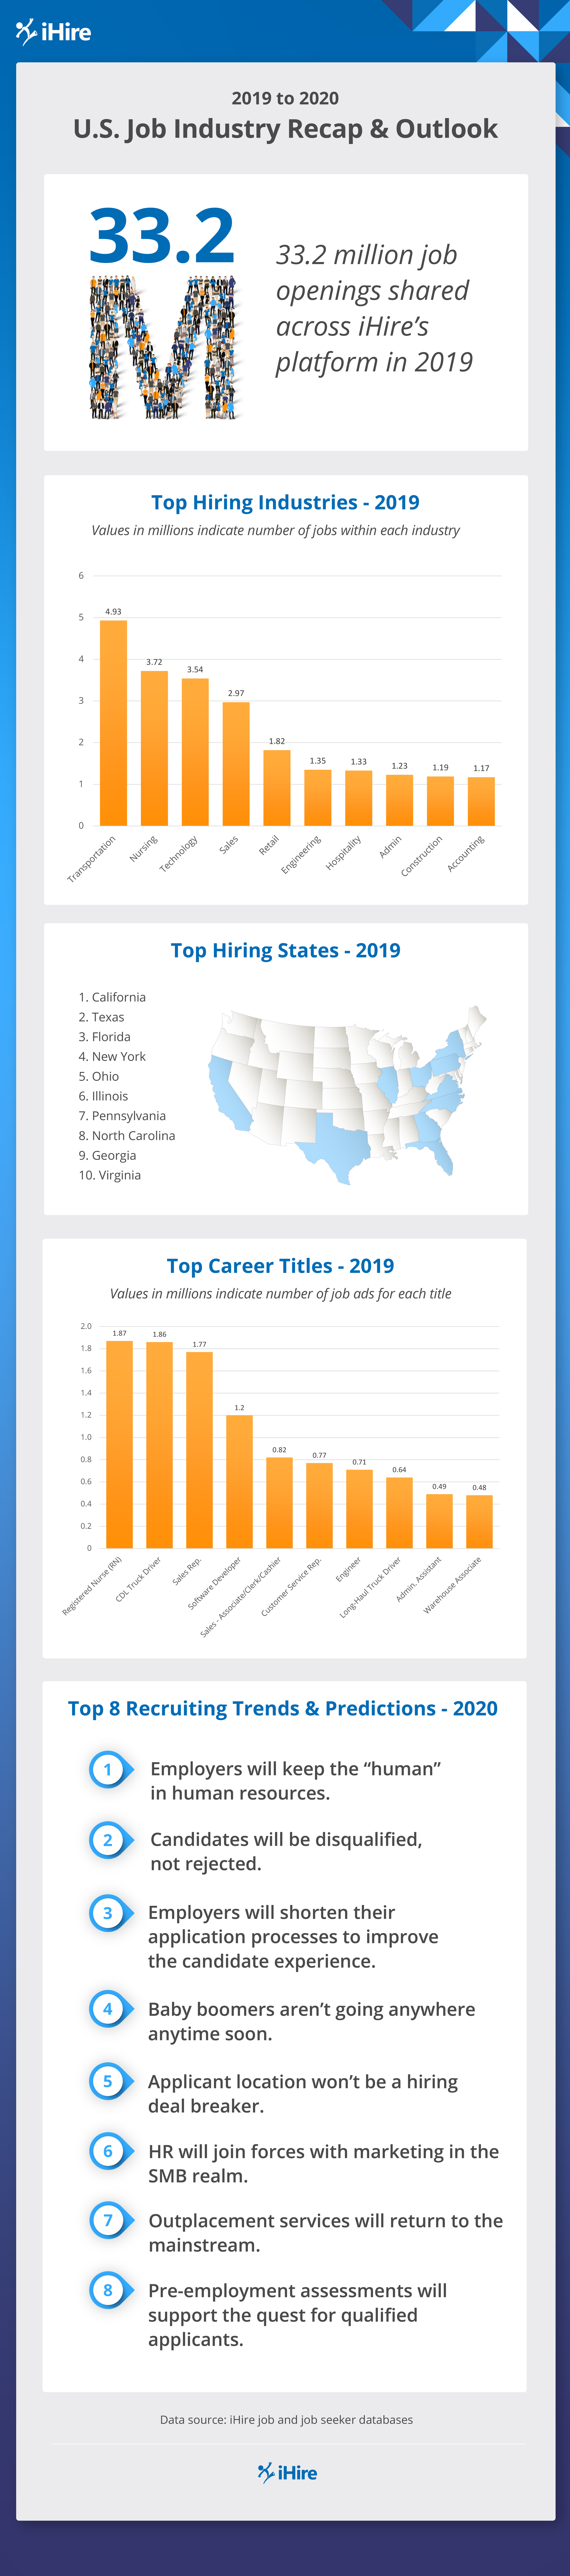 infographic depicting iHire's job postings from 2019 and trends for 2020